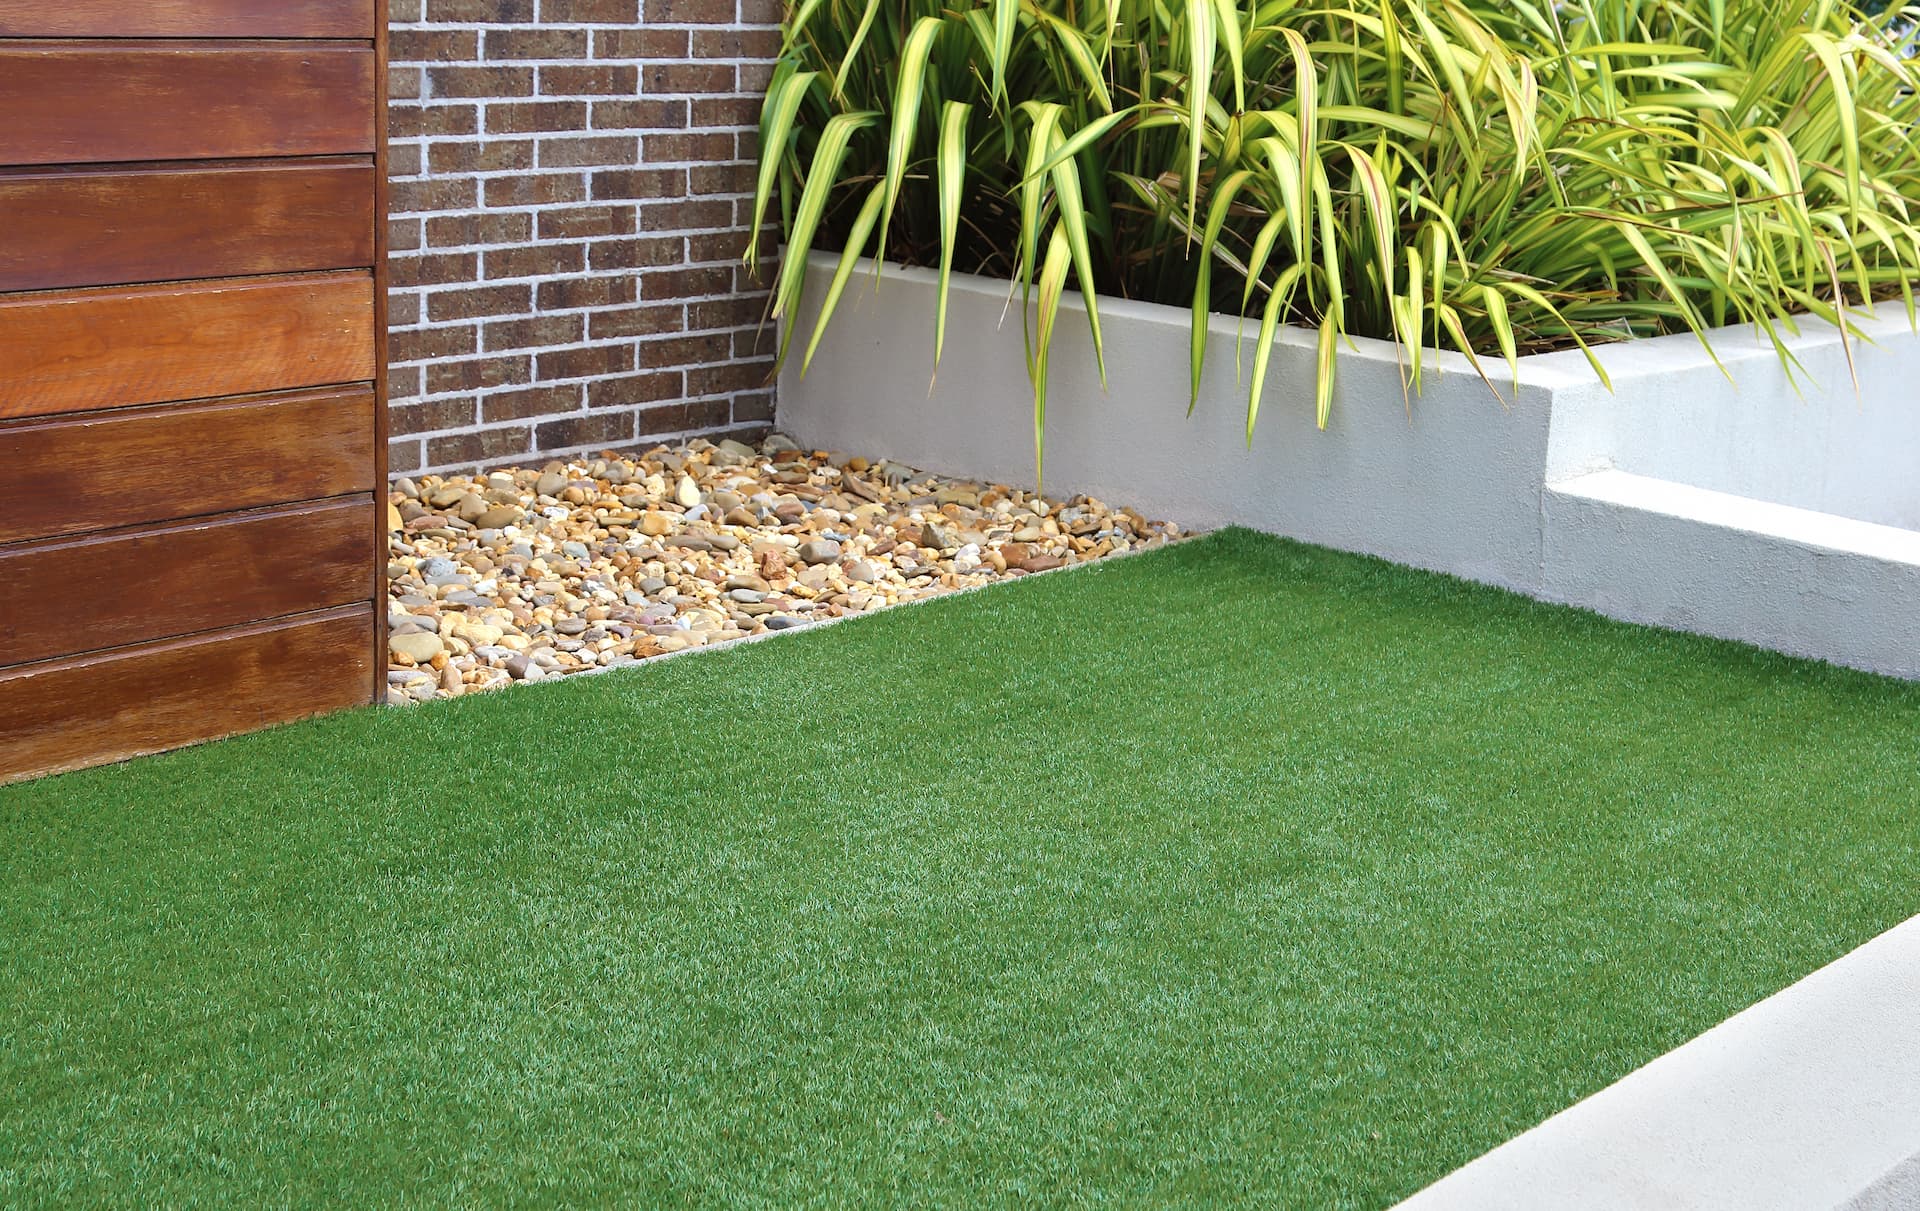 Licenced Artificial Grass & Turf services in Prestwich